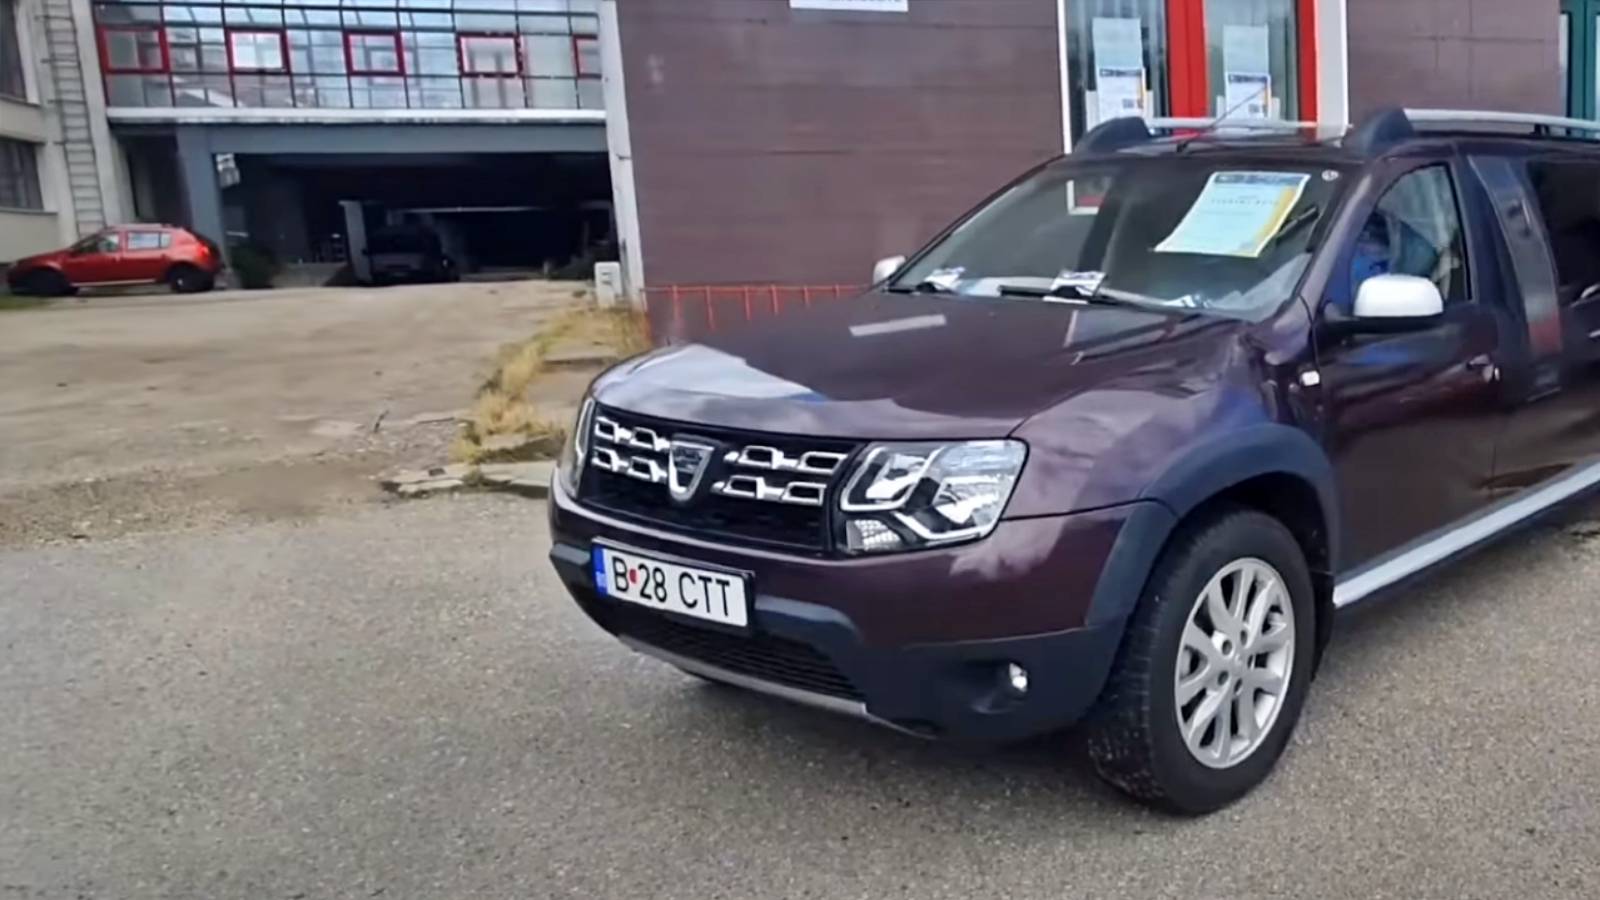 DACIA Duster PHOTO Spectacular Exclusive Model Given on the Romanian Back